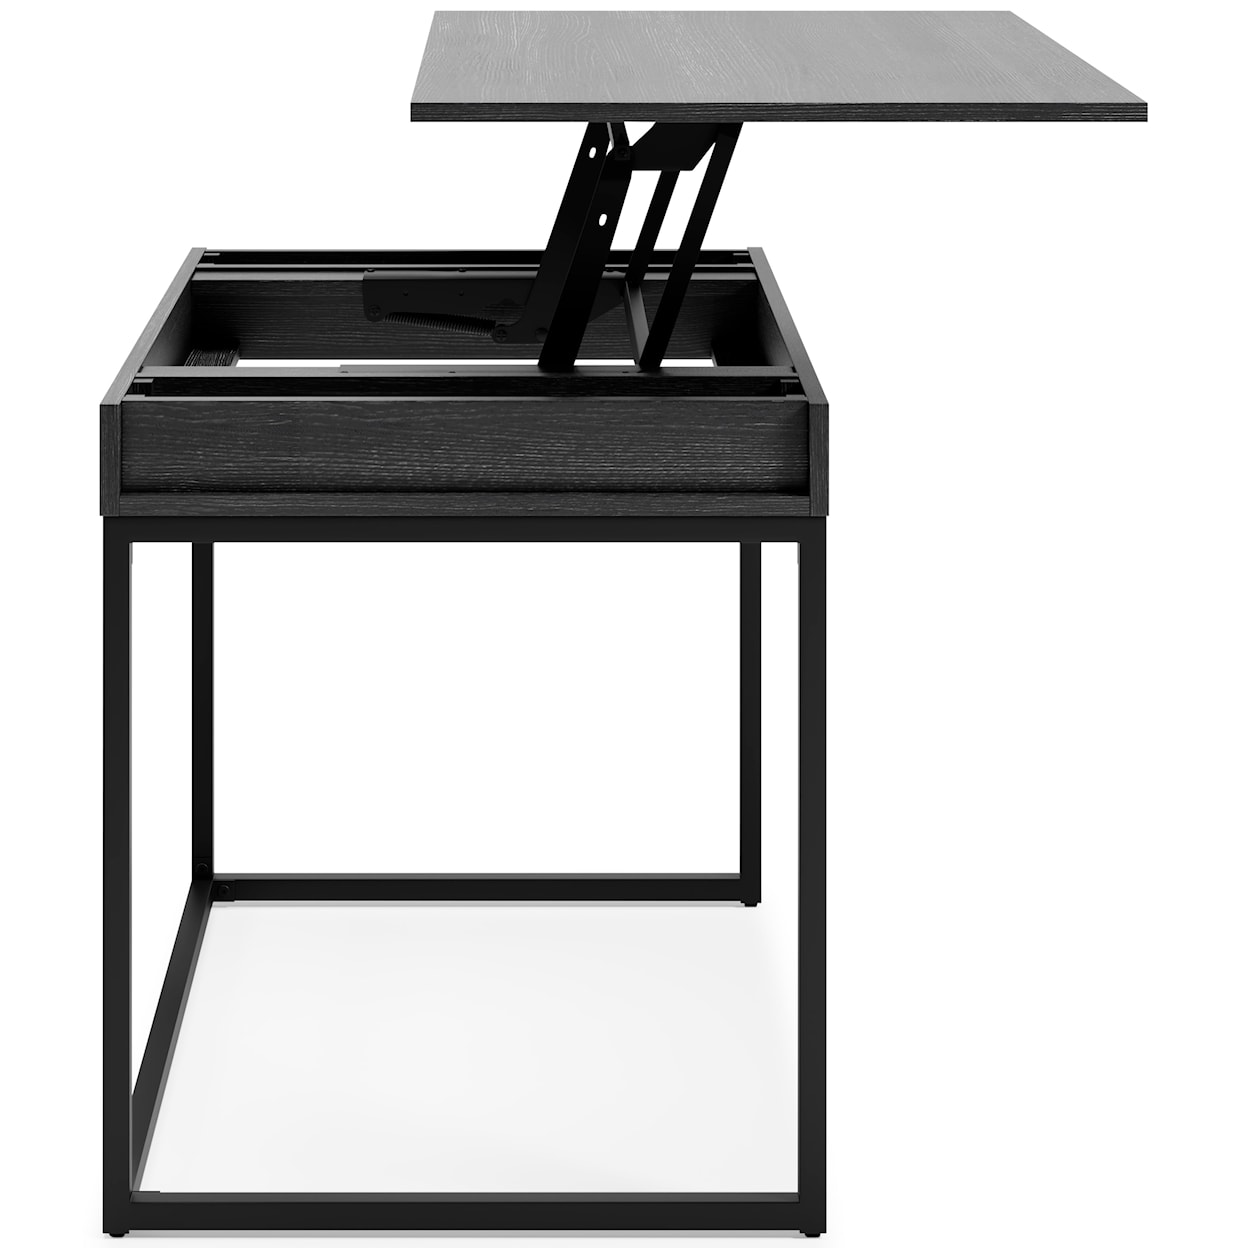 Ashley Furniture Signature Design Yarlow 36" Home Office Lift-Top Desk